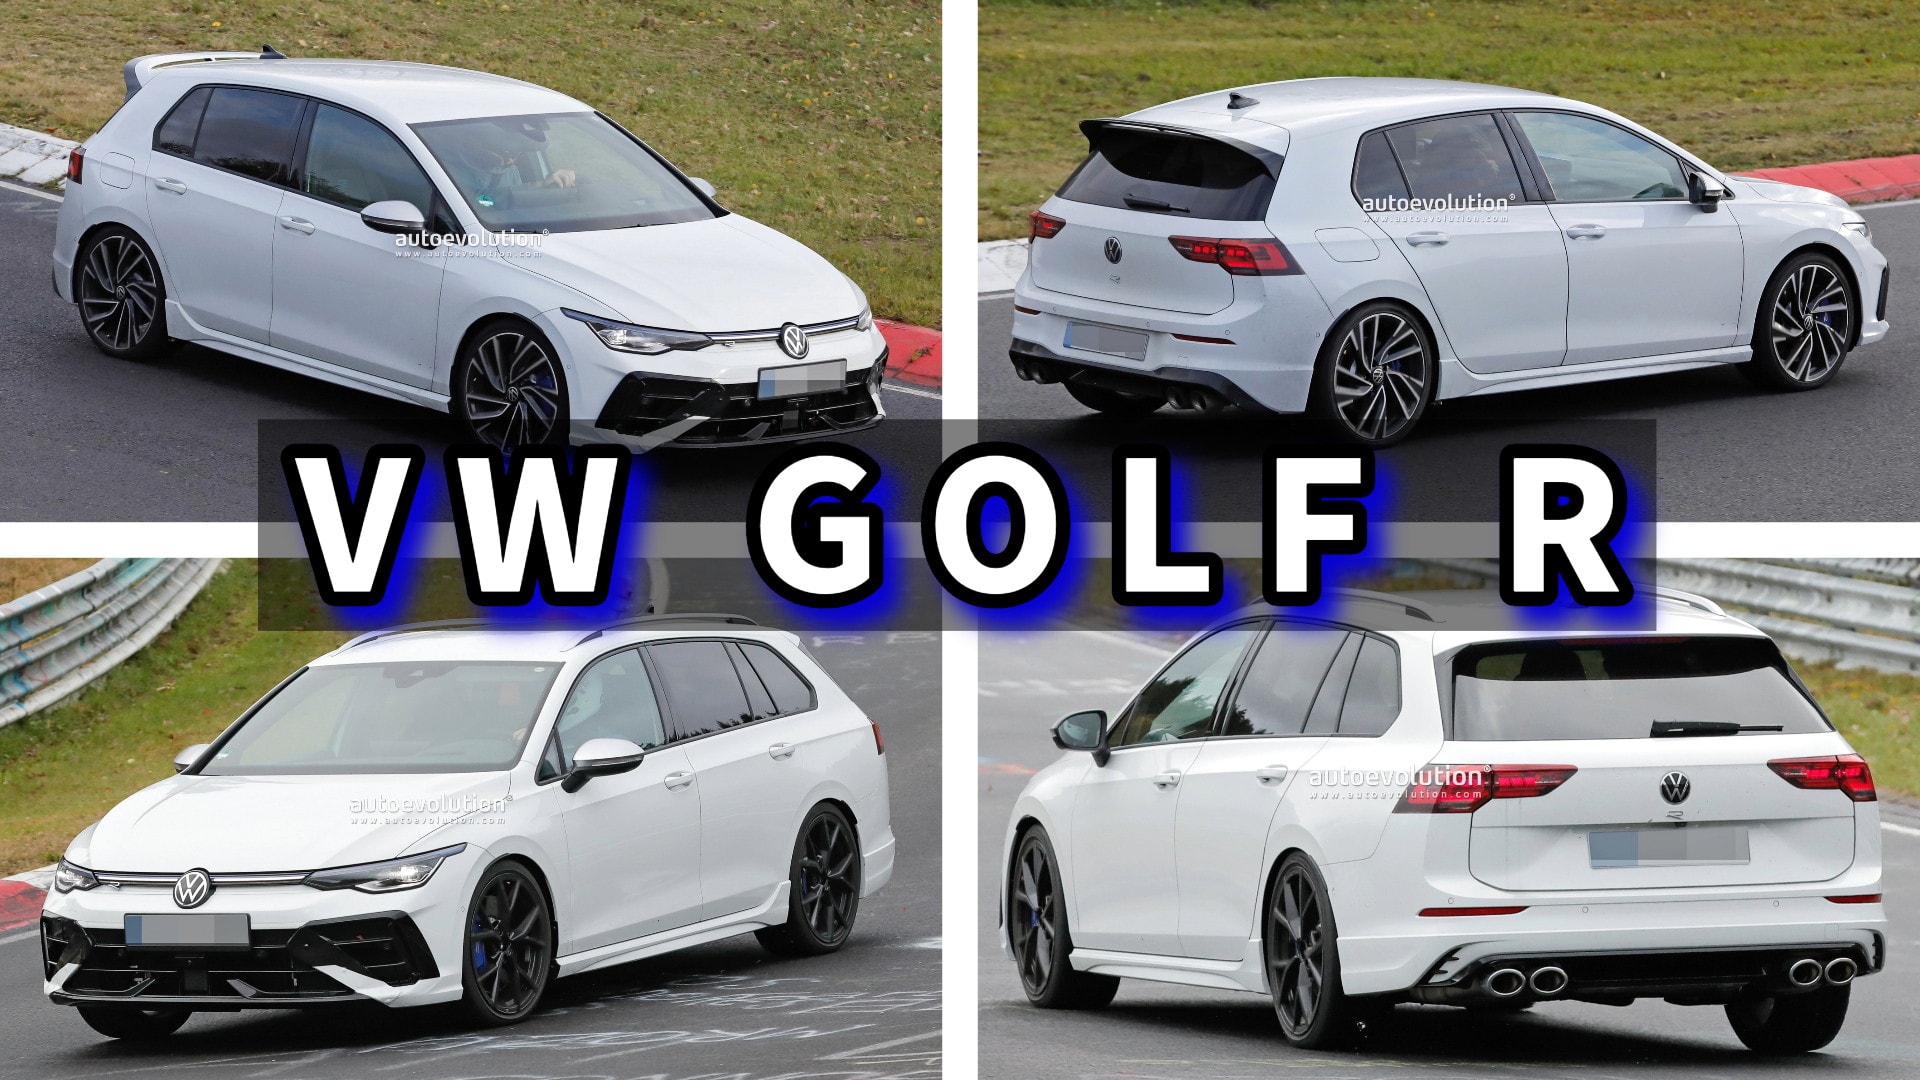 2025 Vw Golf R Spied In Hatch And Wagon Flavors Can You Spot The Changes 224439 1 